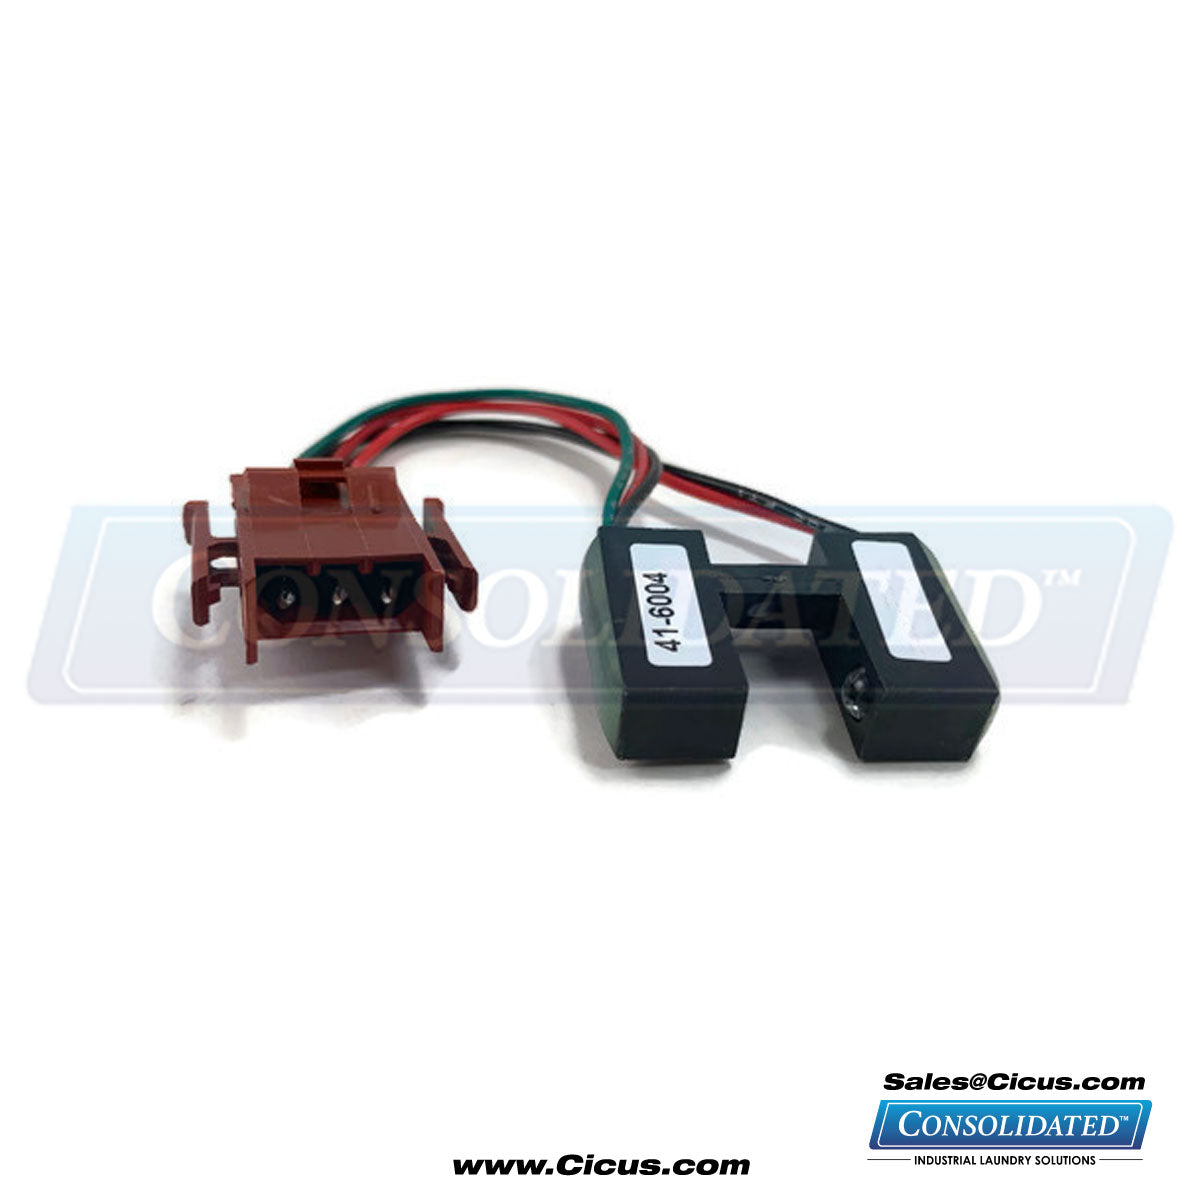 ADC Optical Switch 140026 [137056] - Front View